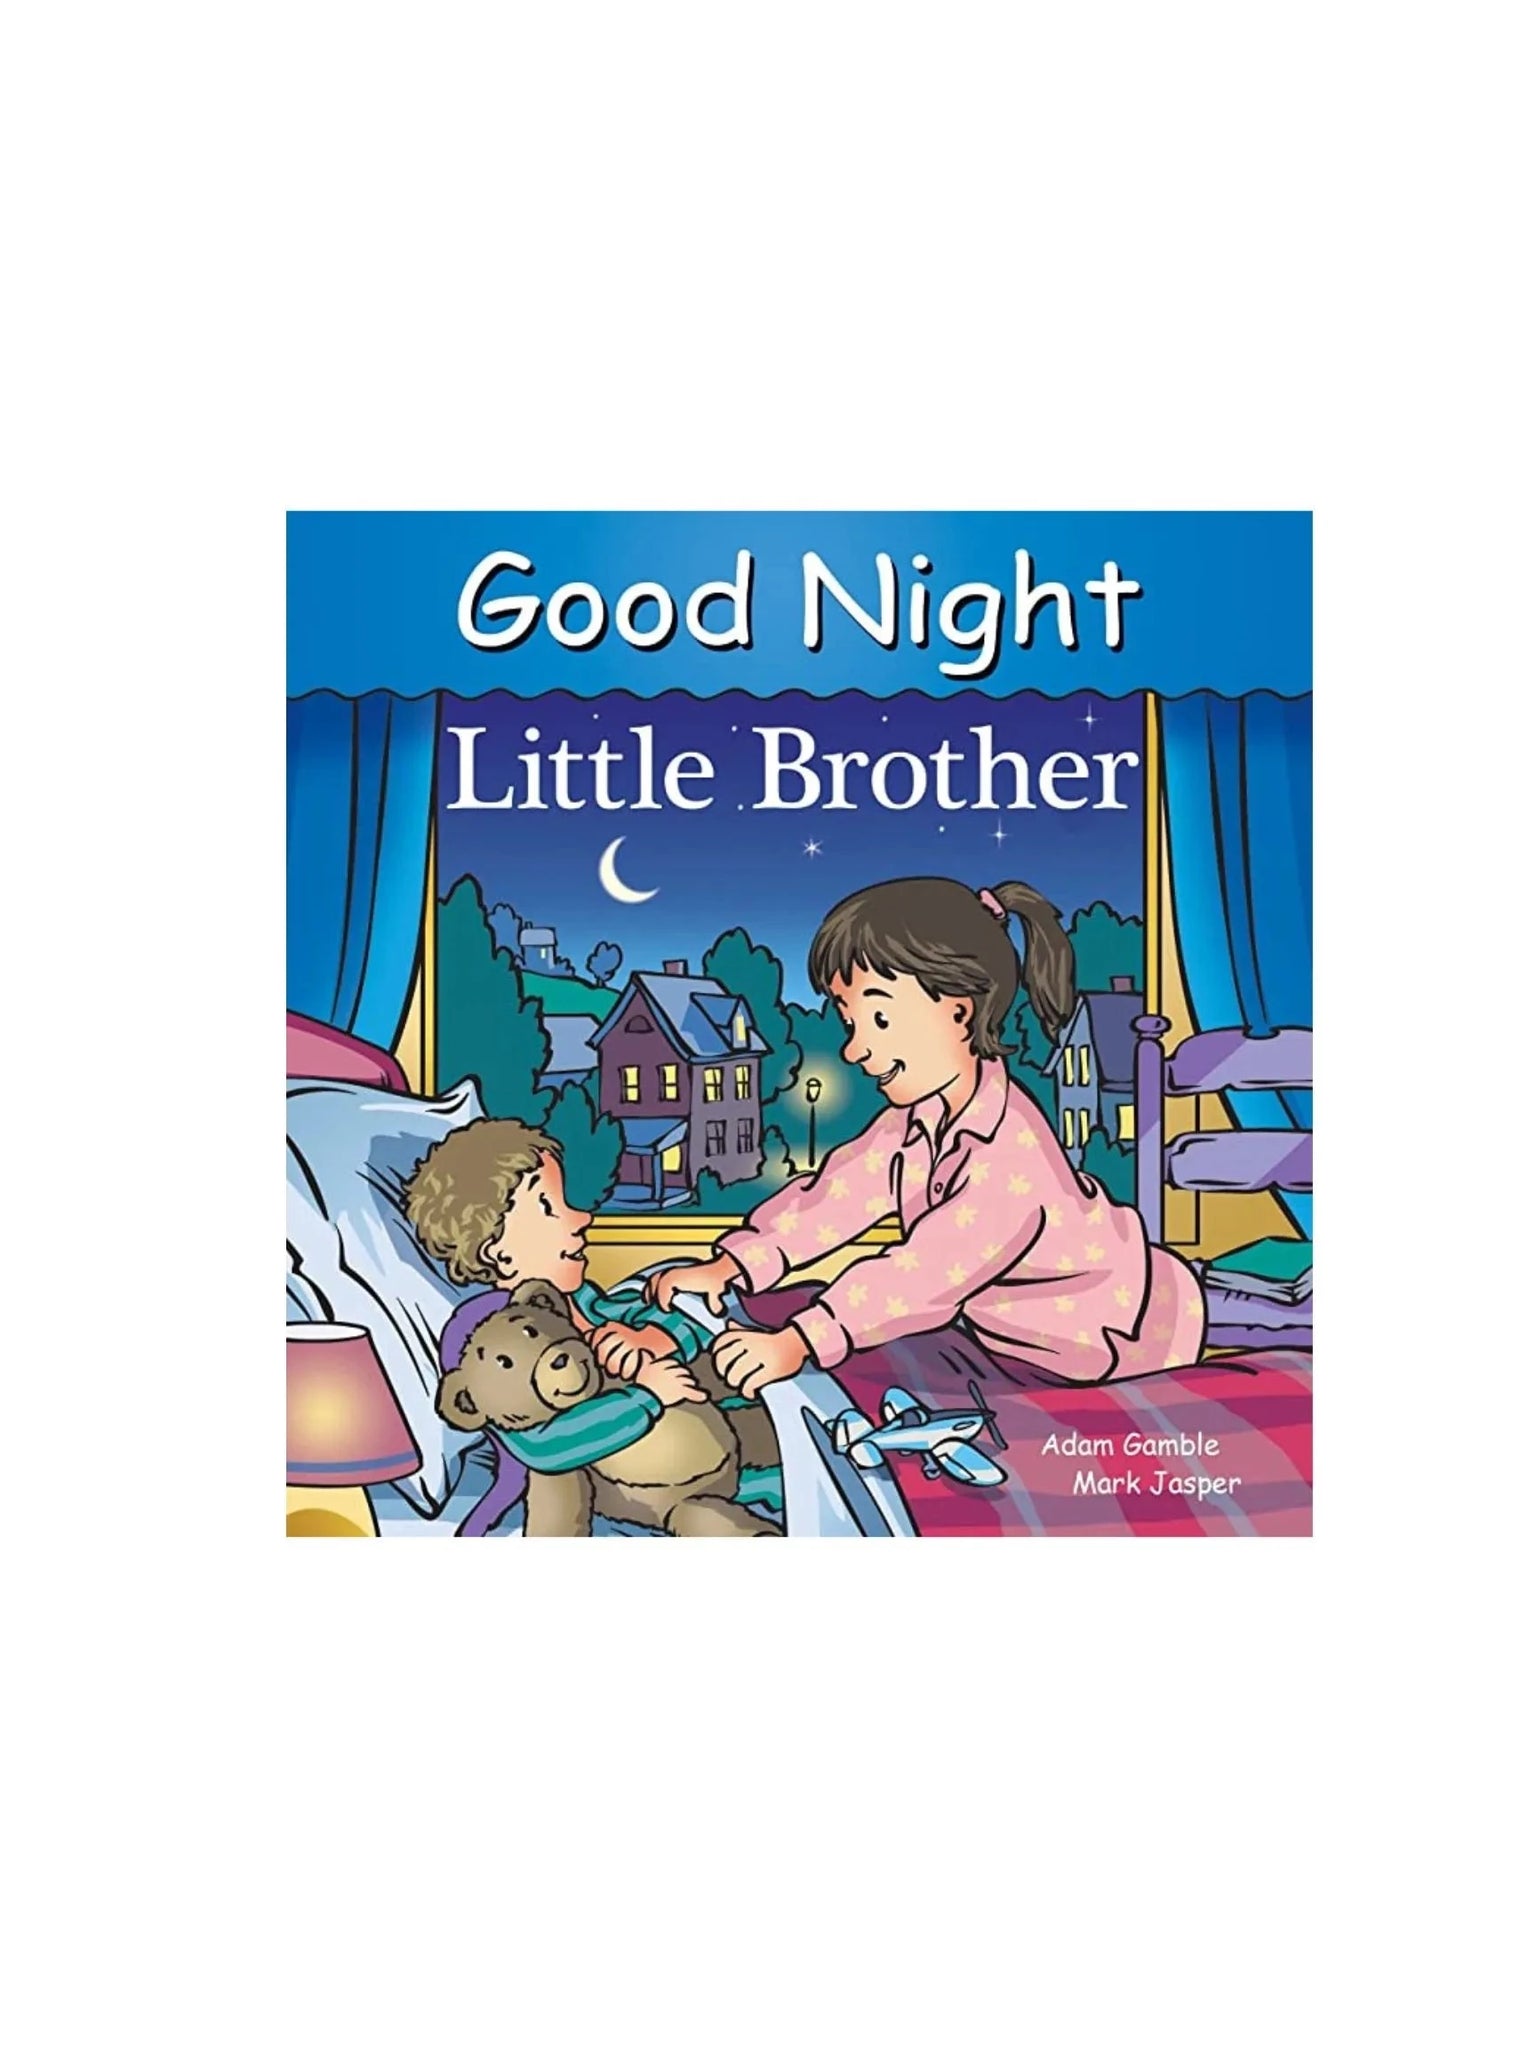 good night little brother book - shows little girl tucking her little brother into bed